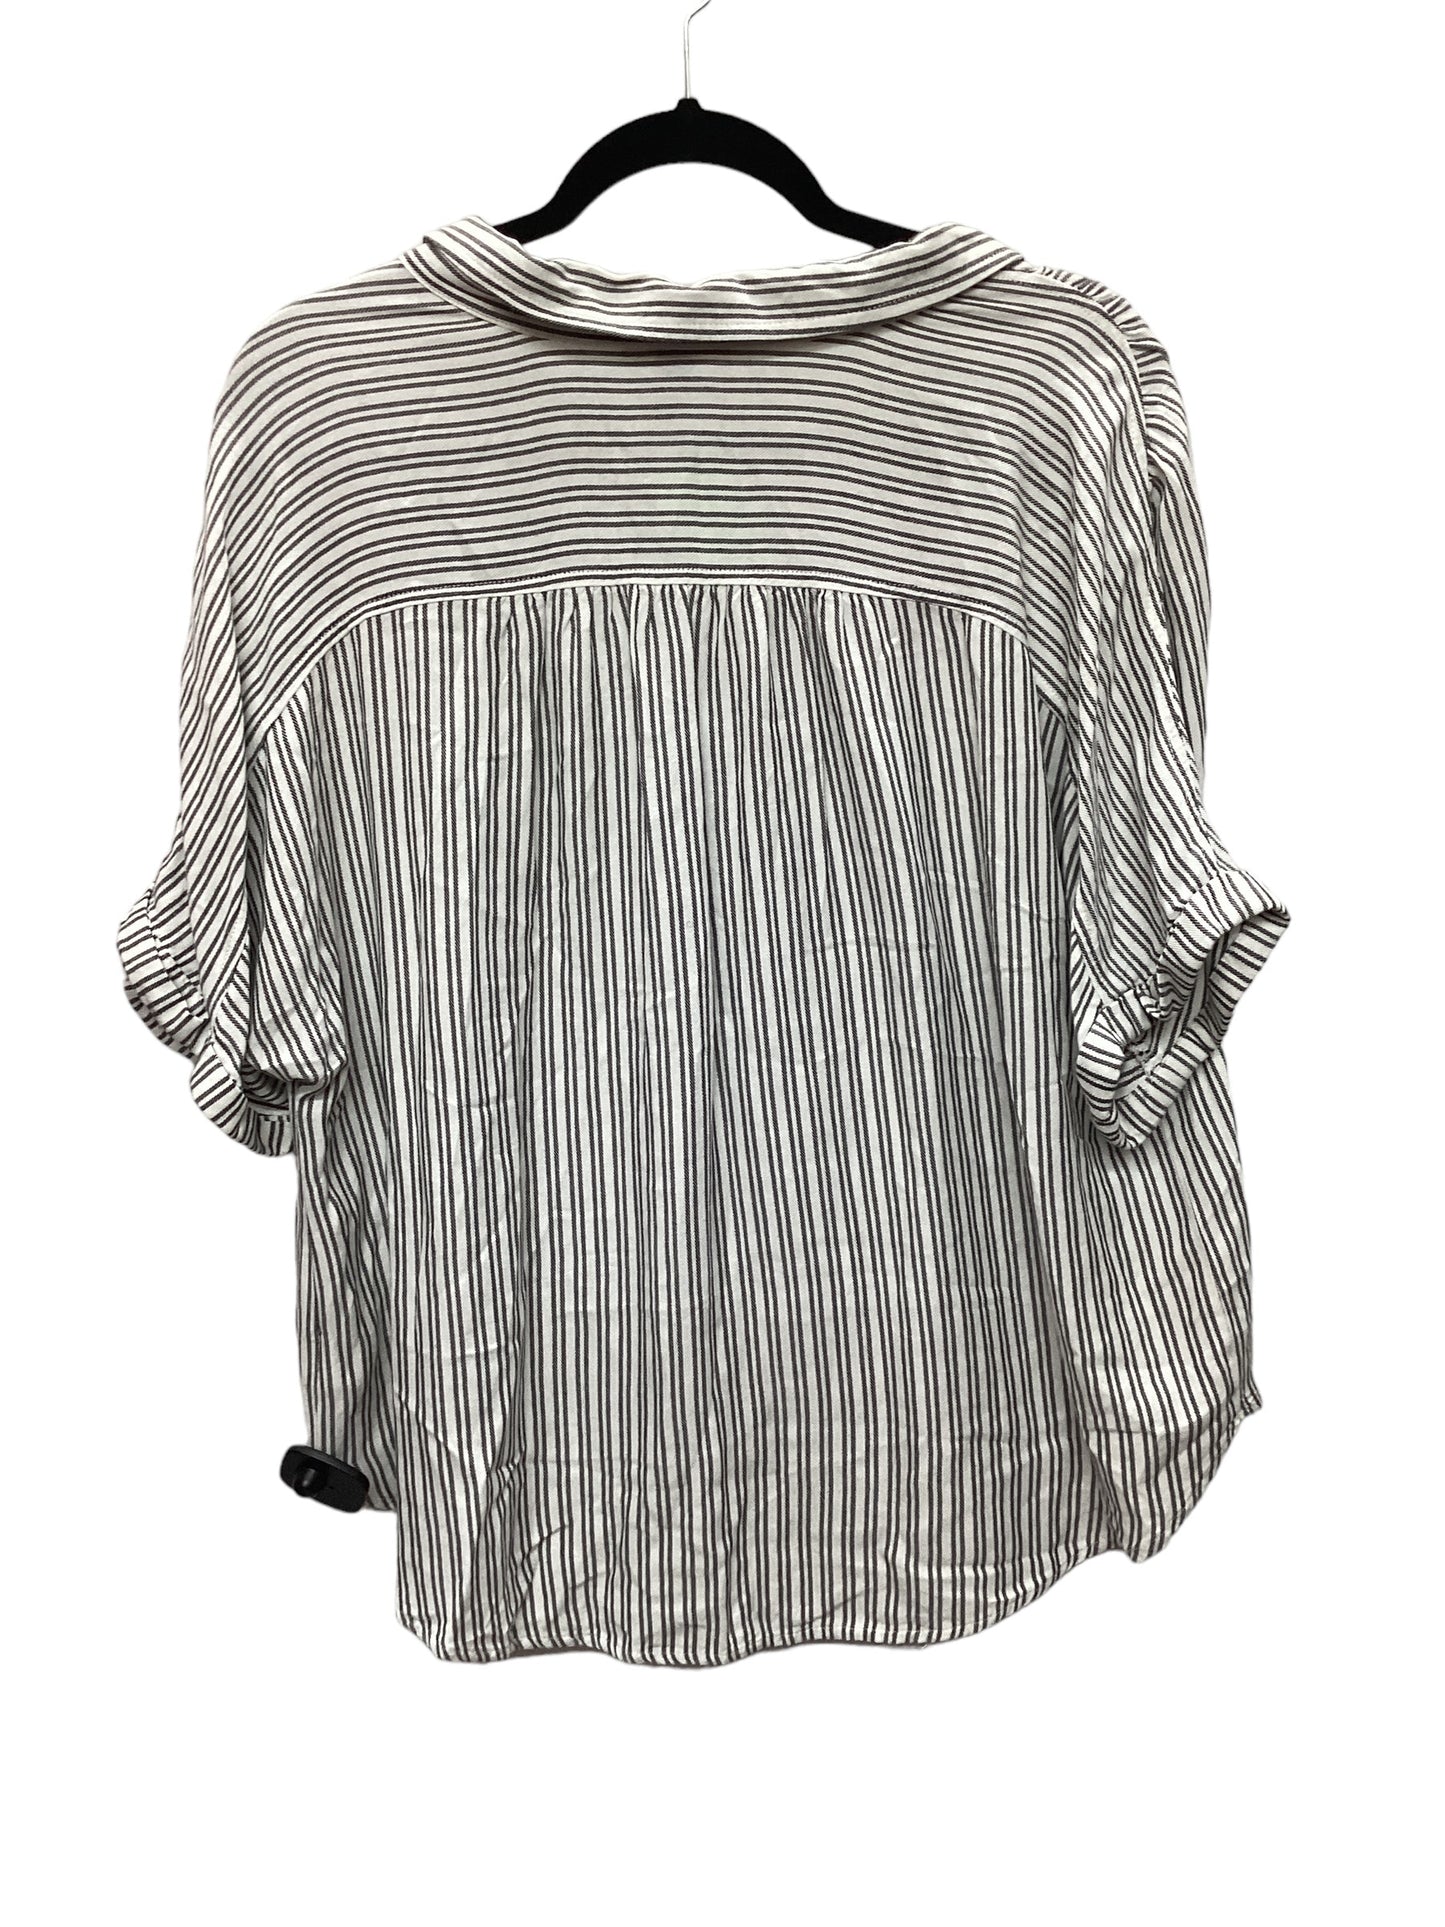 Top Short Sleeve By Universal Thread  Size: Xxl